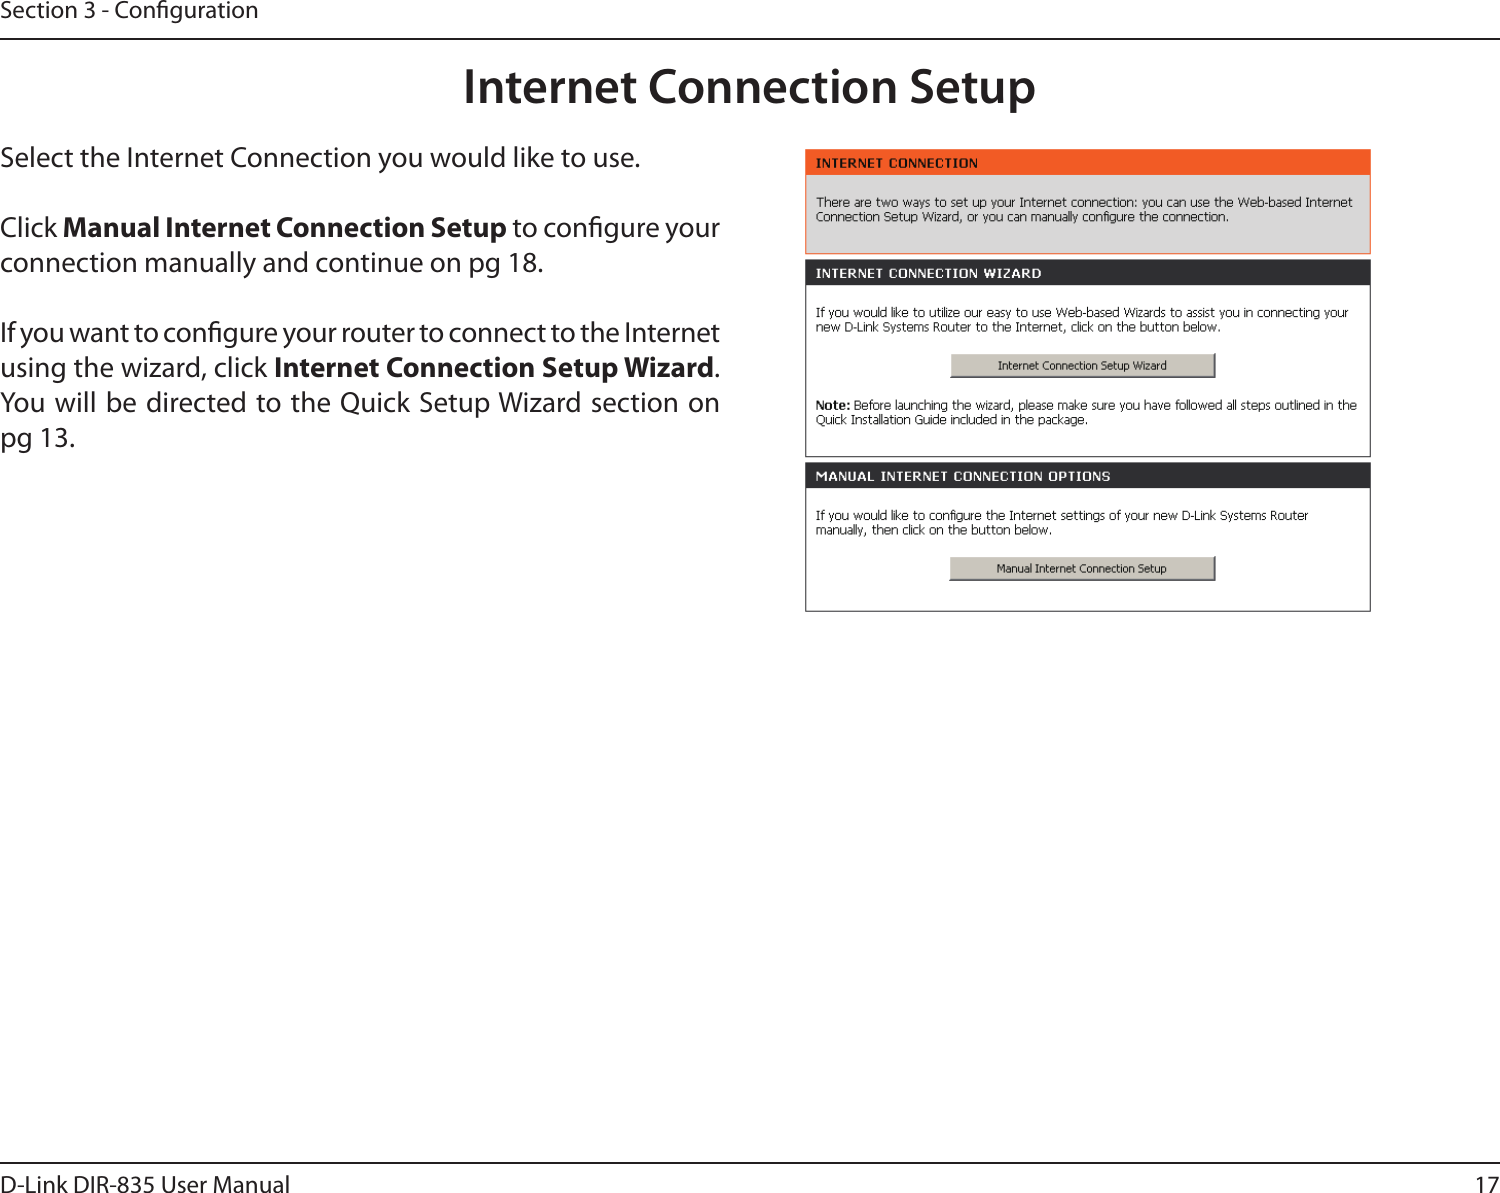 17D-Link DIR-835 User ManualSection 3 - CongurationInternet Connection SetupSelect the Internet Connection you would like to use. Click Manual Internet Connection Setup to congure your connection manually and continue on pg 18.If you want to congure your router to connect to the Internet using the wizard, click Internet Connection Setup Wizard. You will be directed to the Quick Setup Wizard section on pg 13.